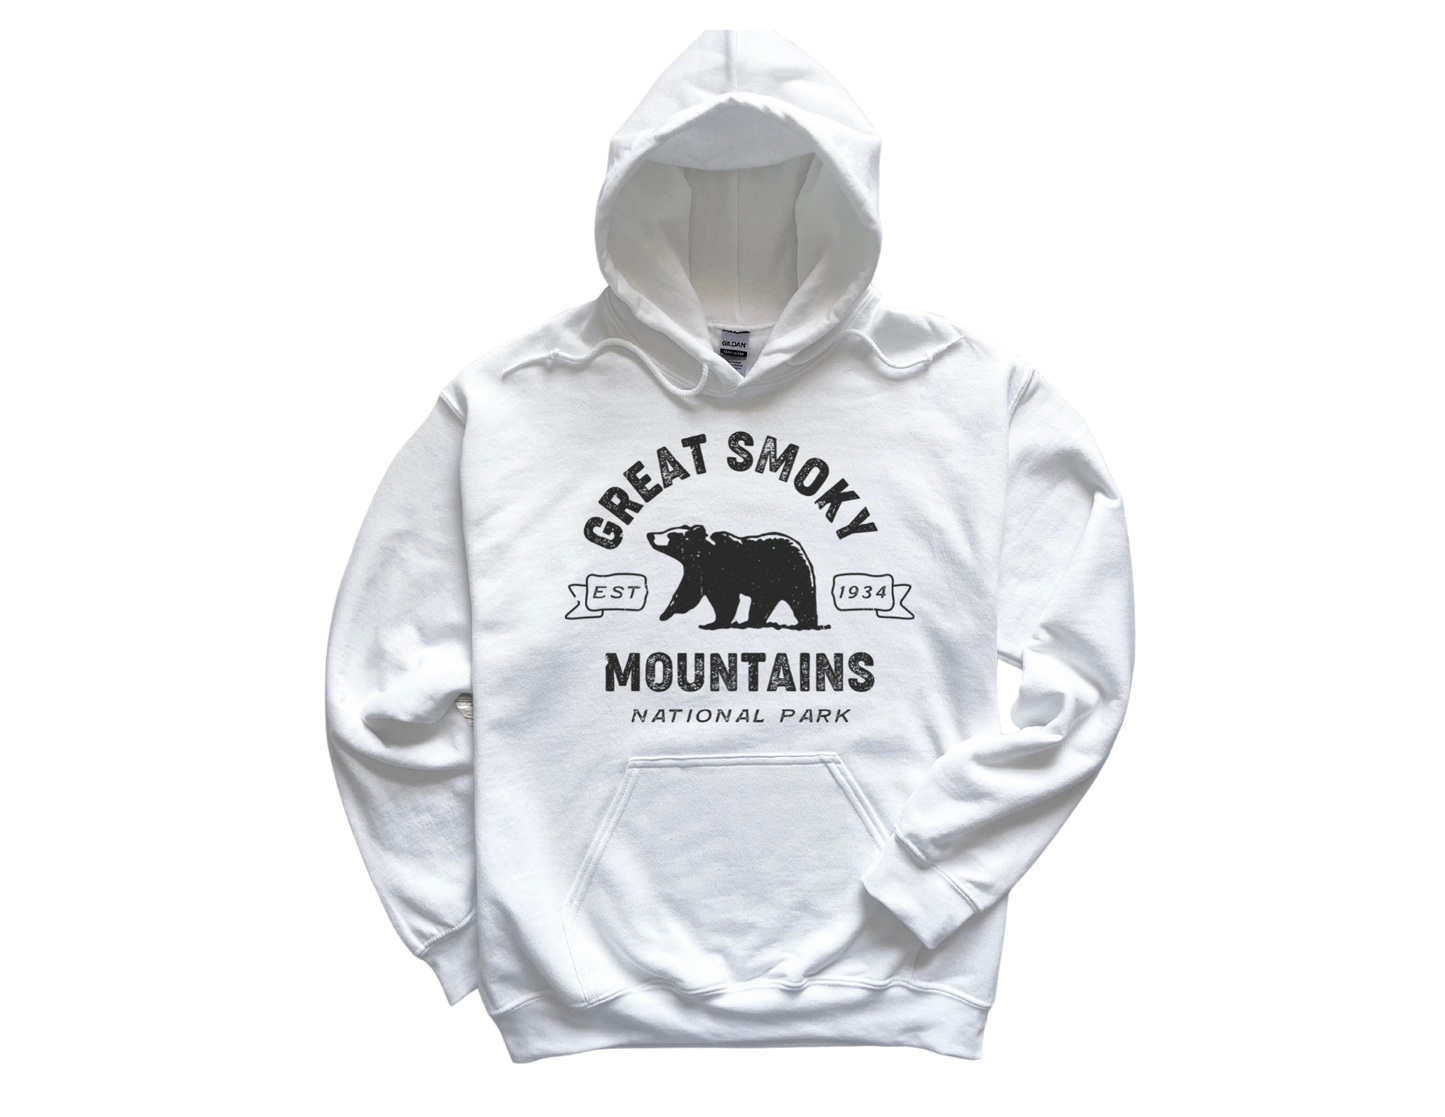 Great Smoky Mountains National Park Unisex Hoodie